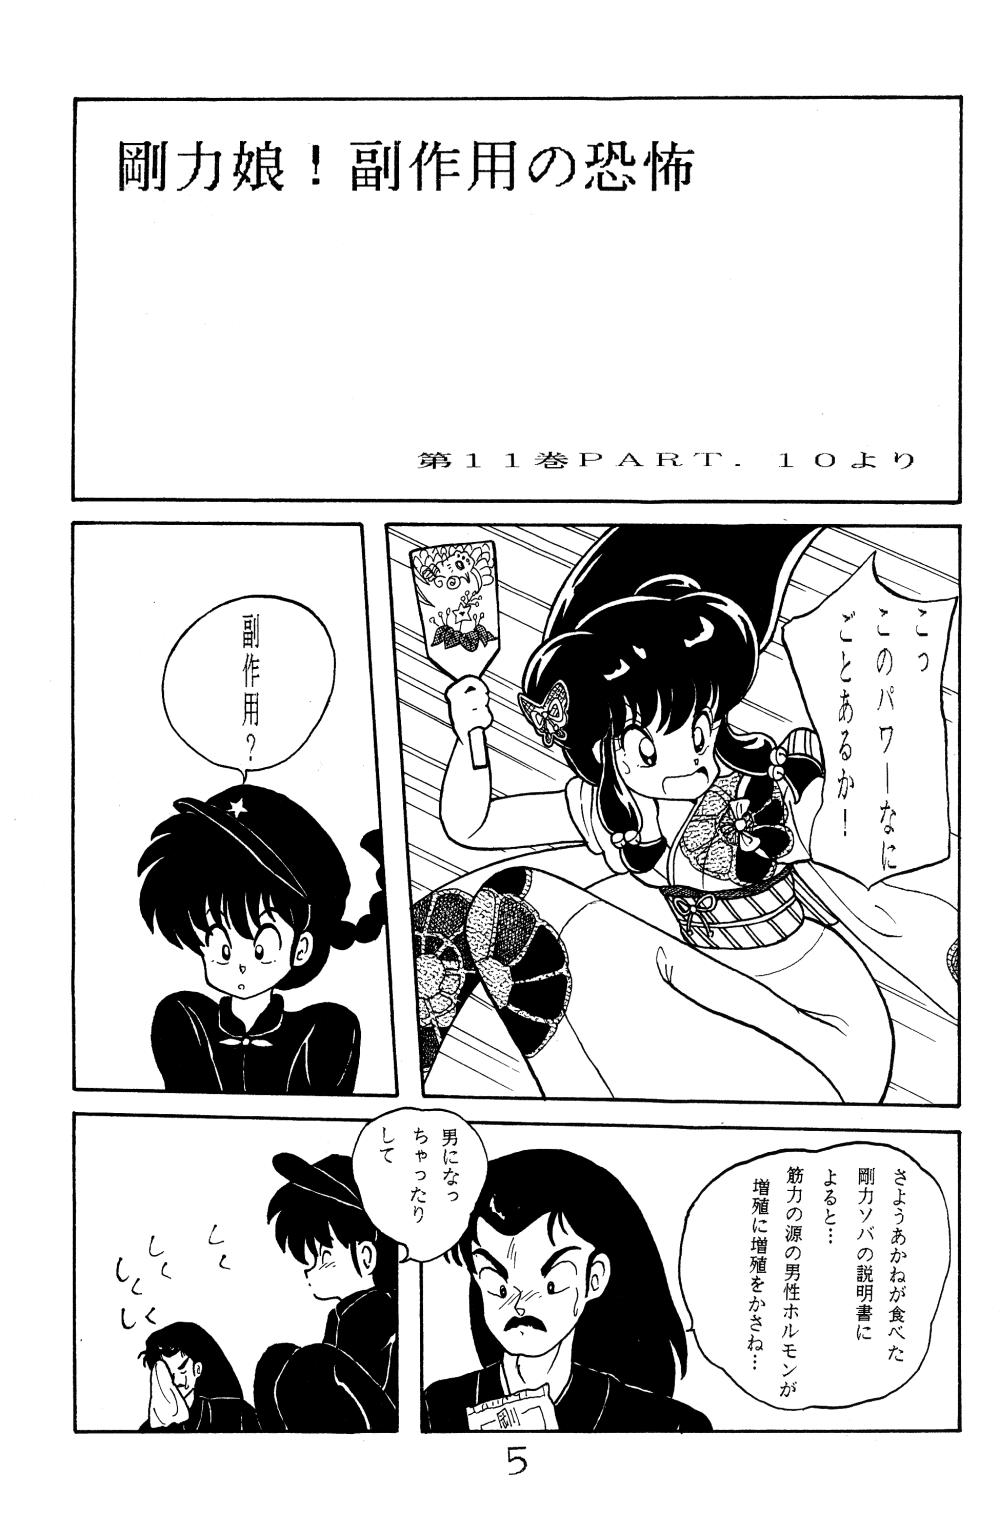 Neighbor NOTORIOUS Ranma 1/2 Special - Ranma 12 Amateurs - Page 4